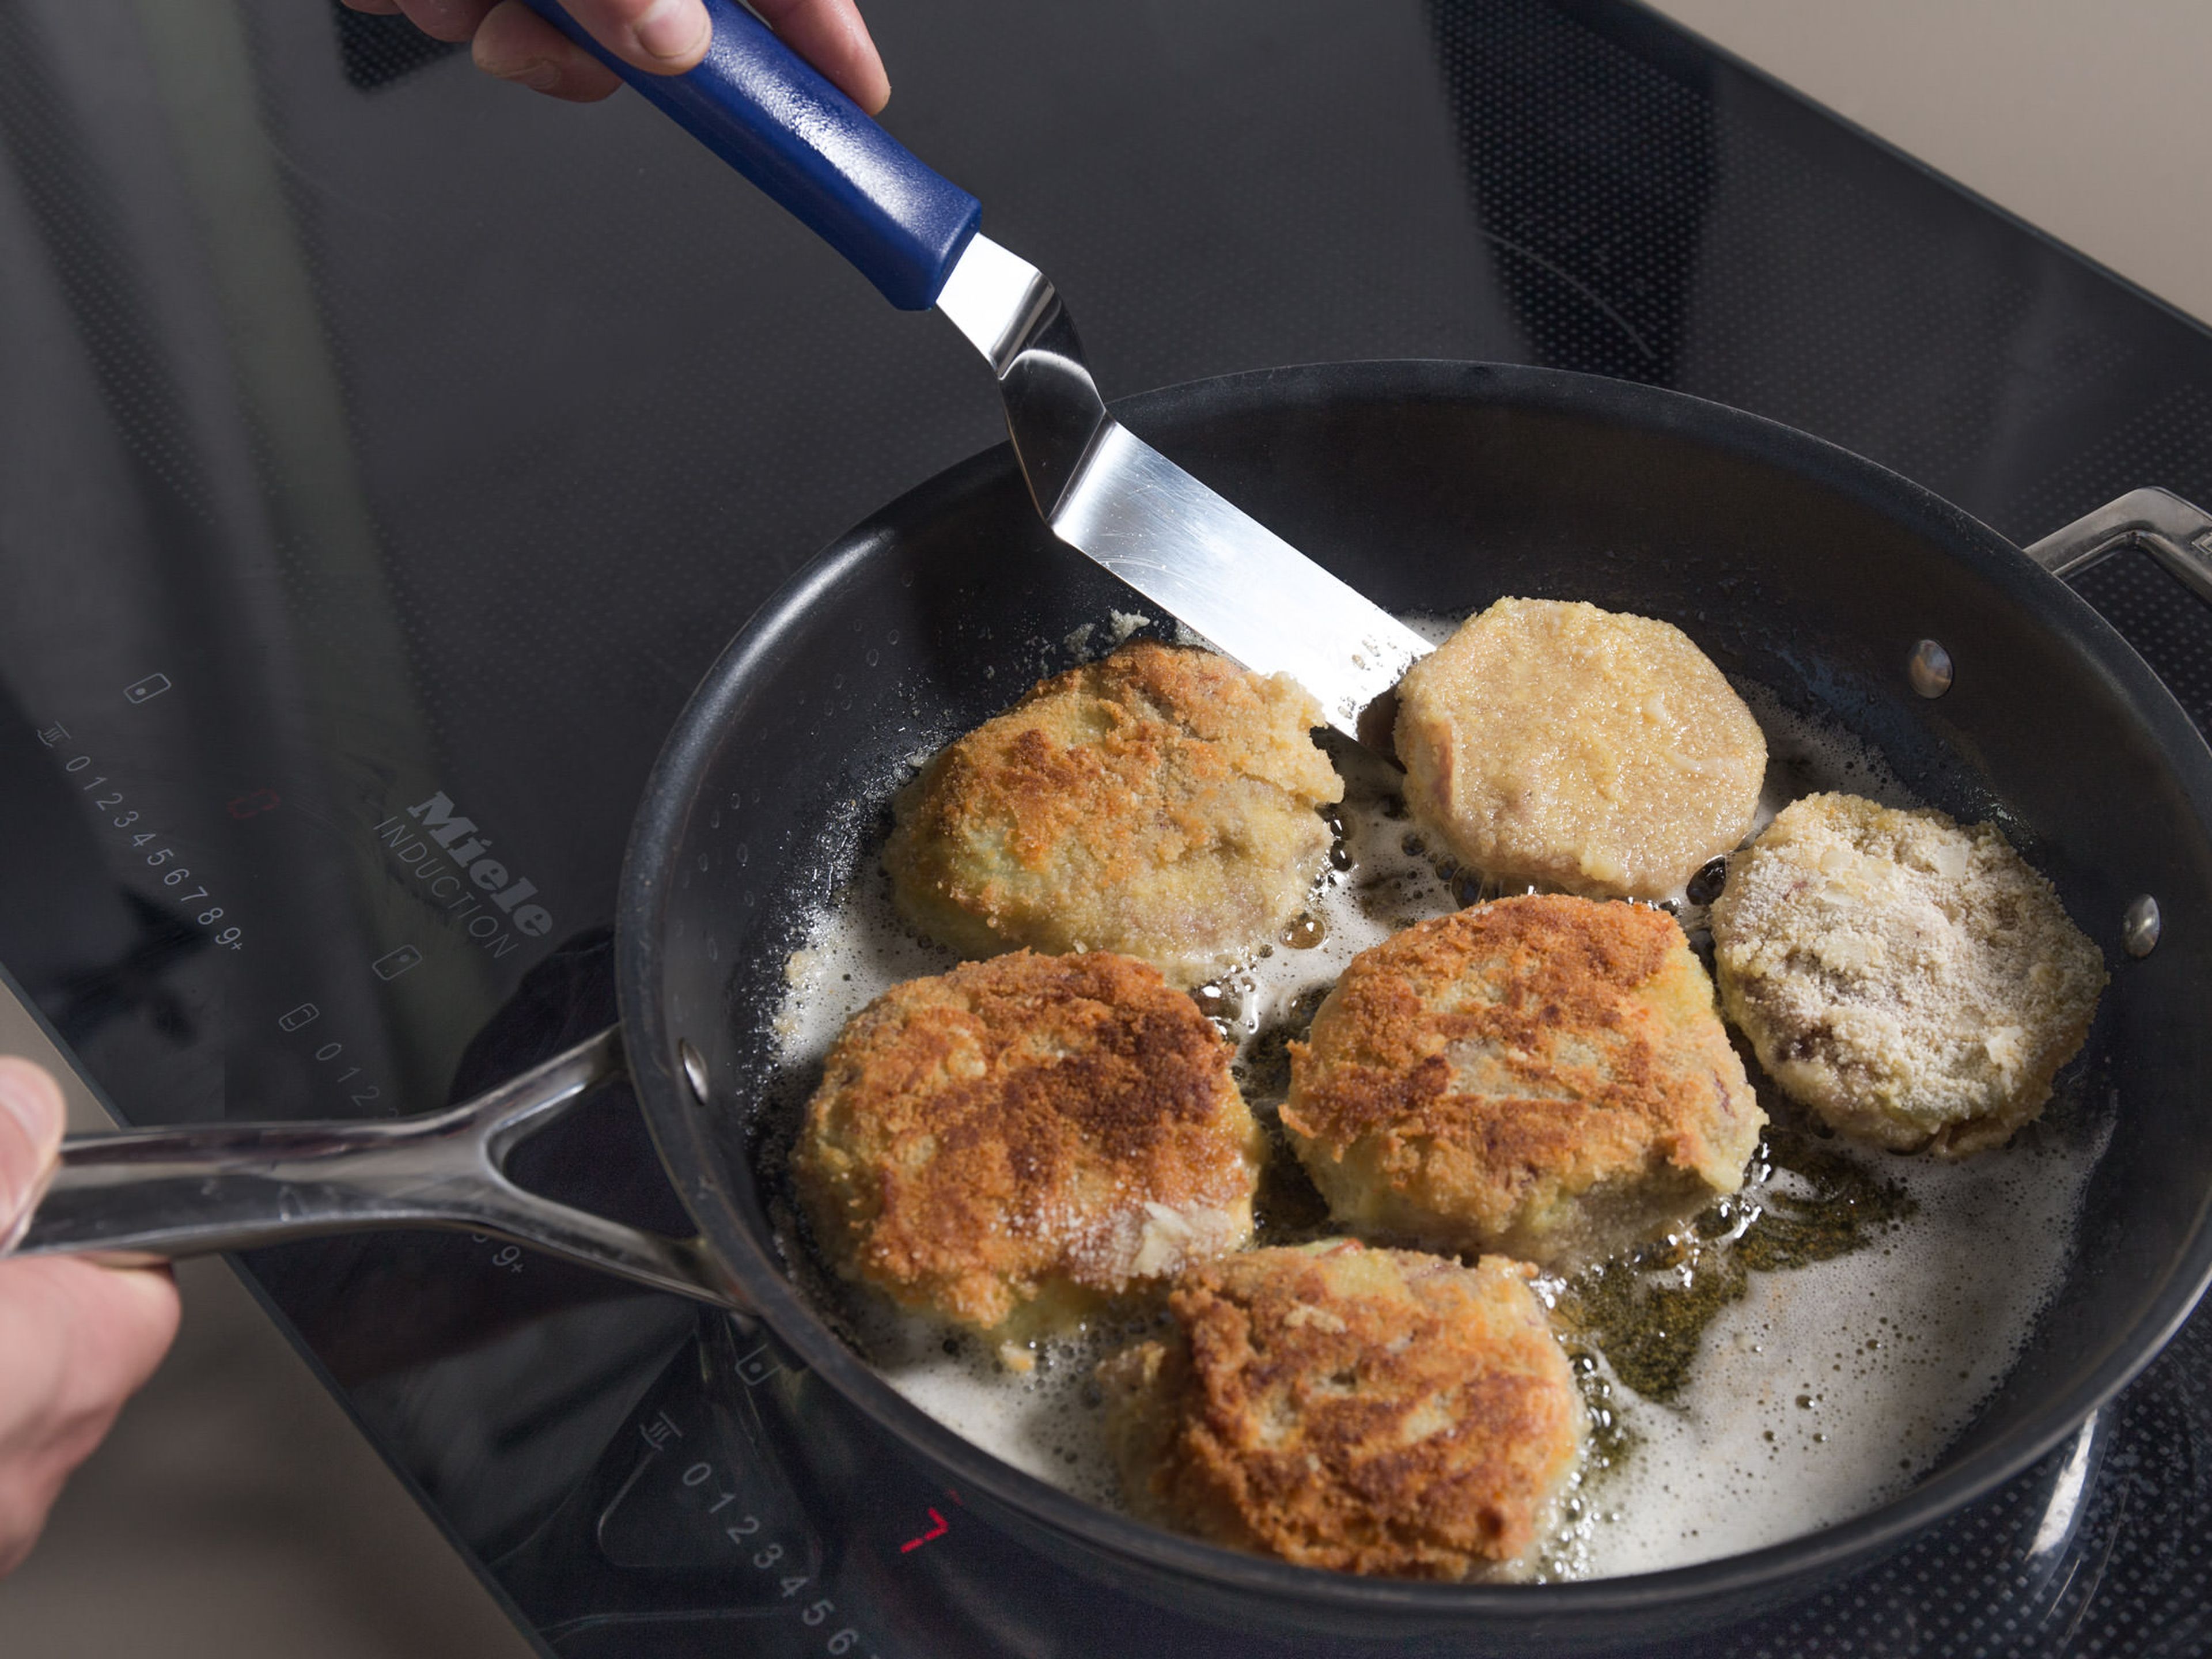 Heat clarified butter and oil in a frying pan over medium high heat. Add kohlrabi and fry for approx. 5 min. on each side, or until browned. Transfer to a paper towel-lined plate to drain. Serve schnitzel with green sauce. Enjoy!